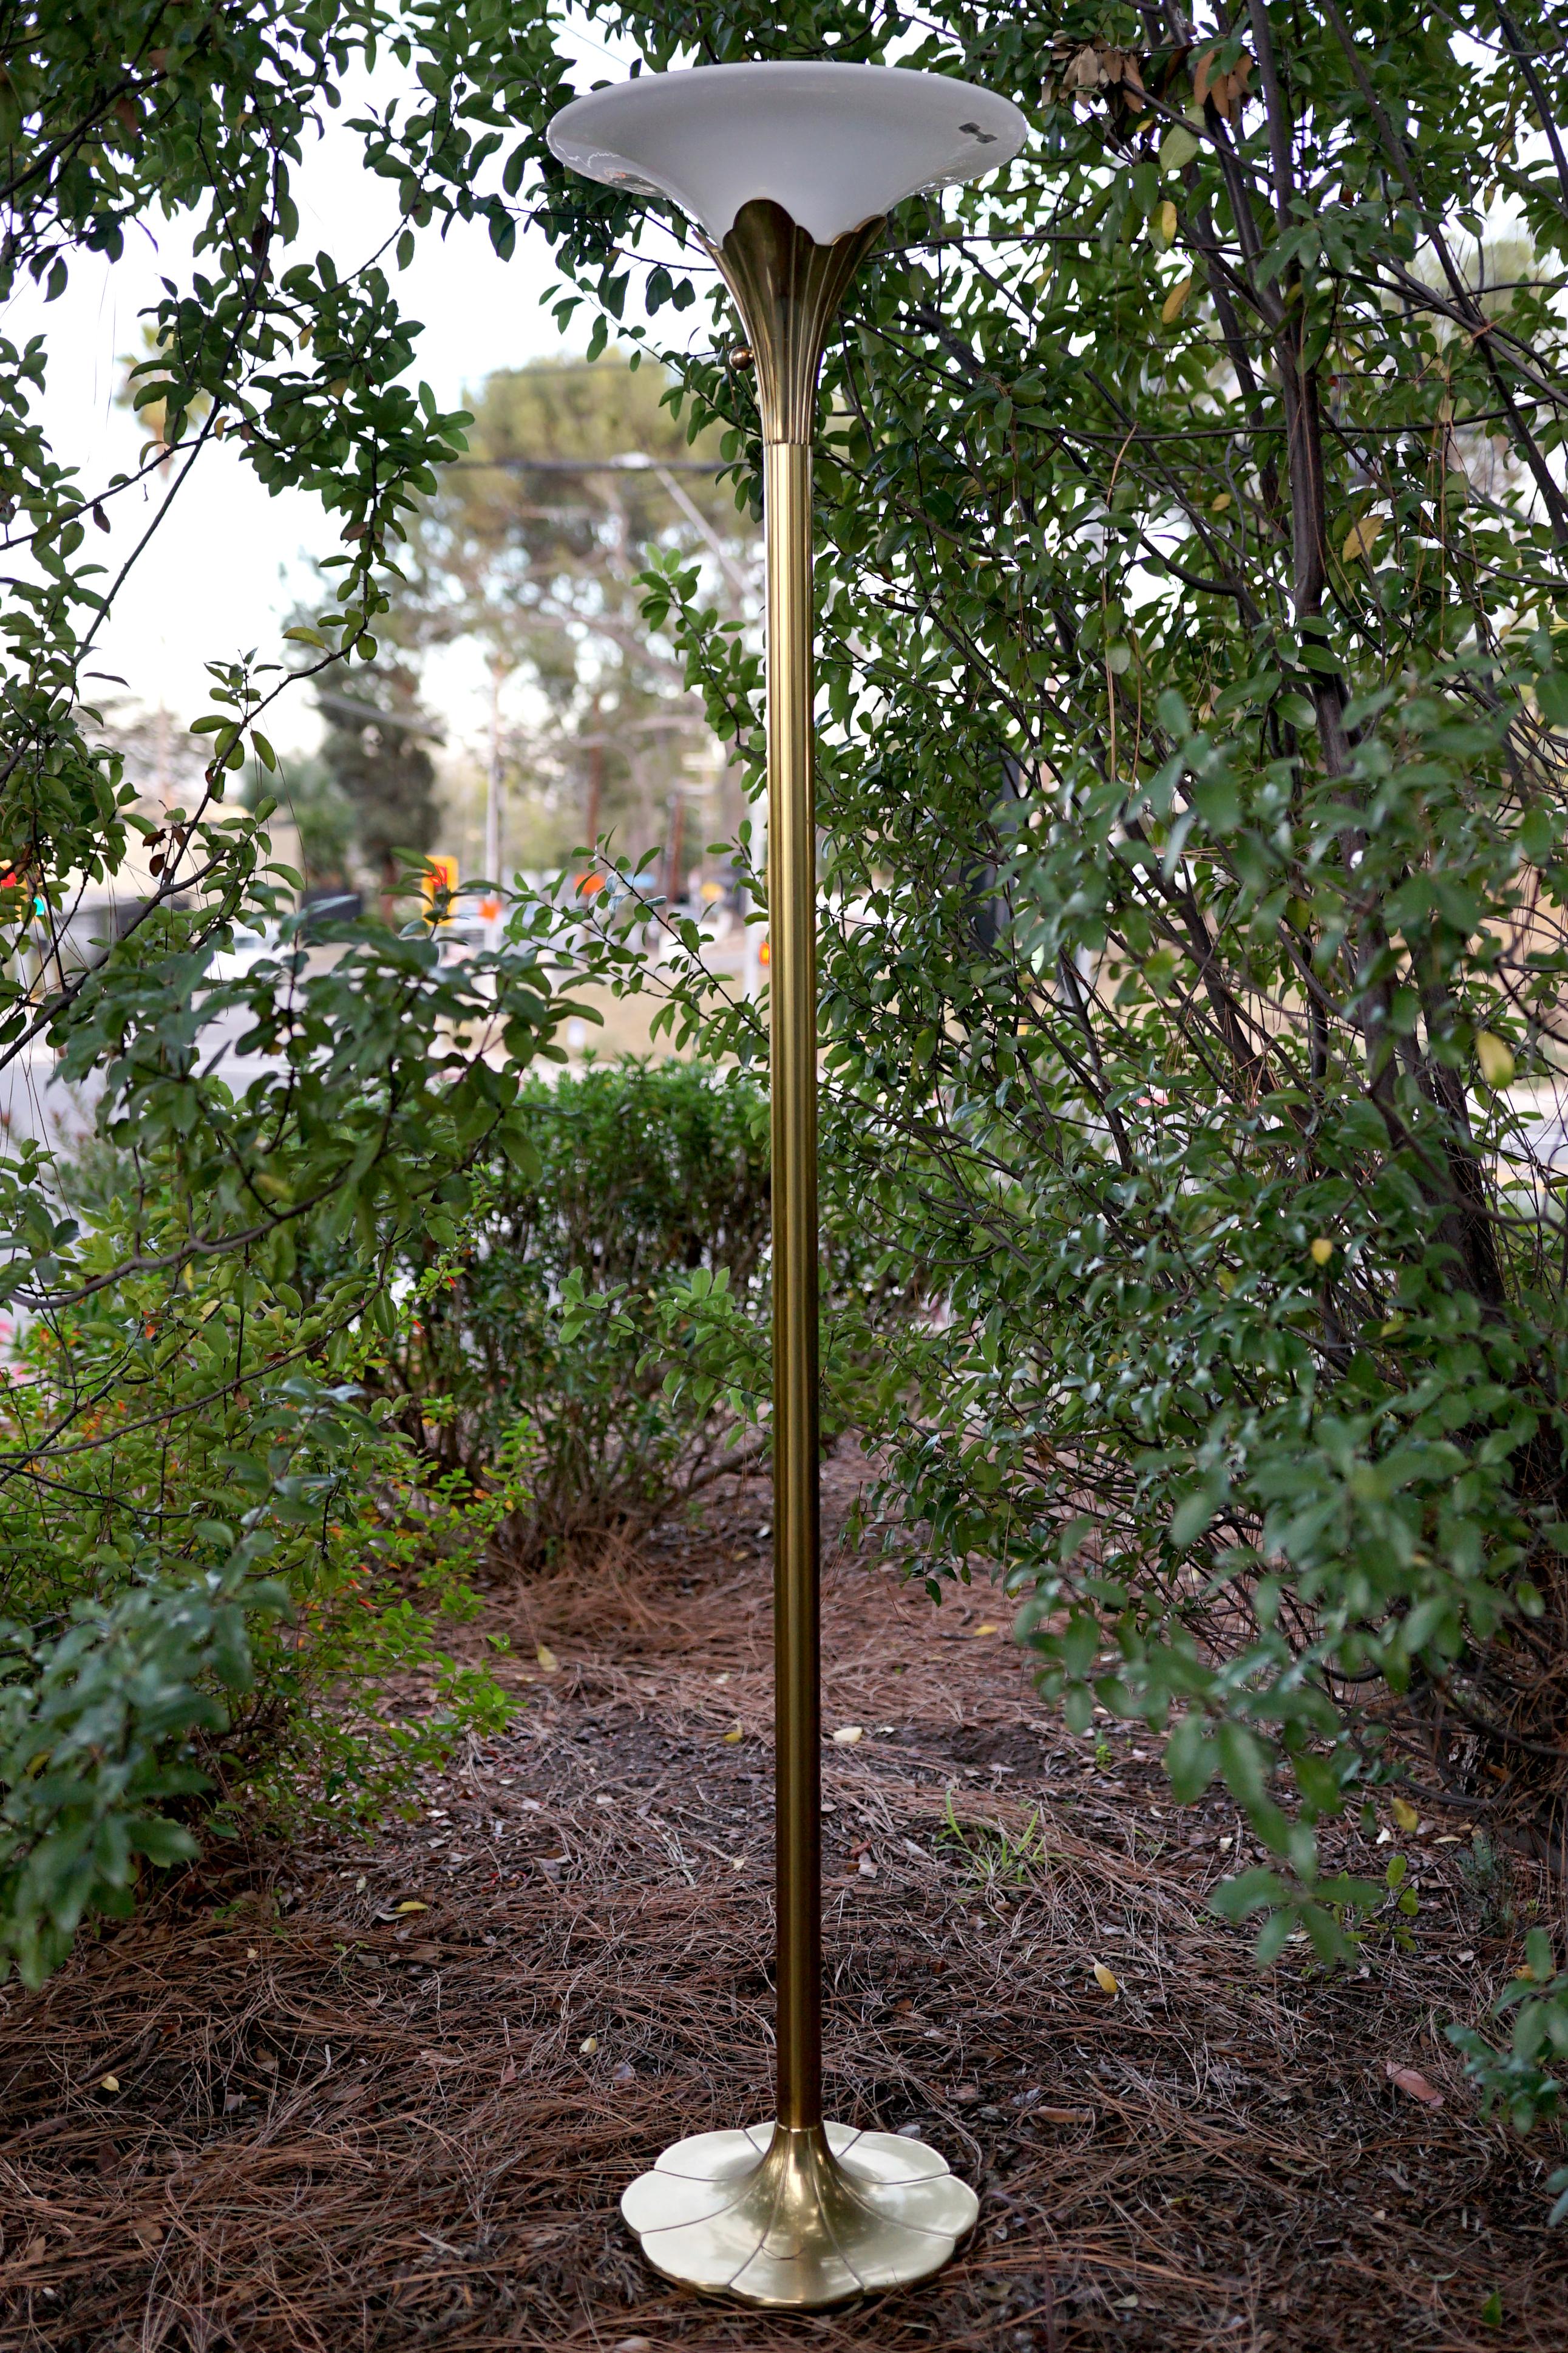 Stiffel quality and style are evident the moment you lay eyes on this brass art deco style lamp. The silhouette with its trumpet-form nod to traditional art deco is a product from Stiffel manufacturing in the 1960s. This is a solid , well made brass